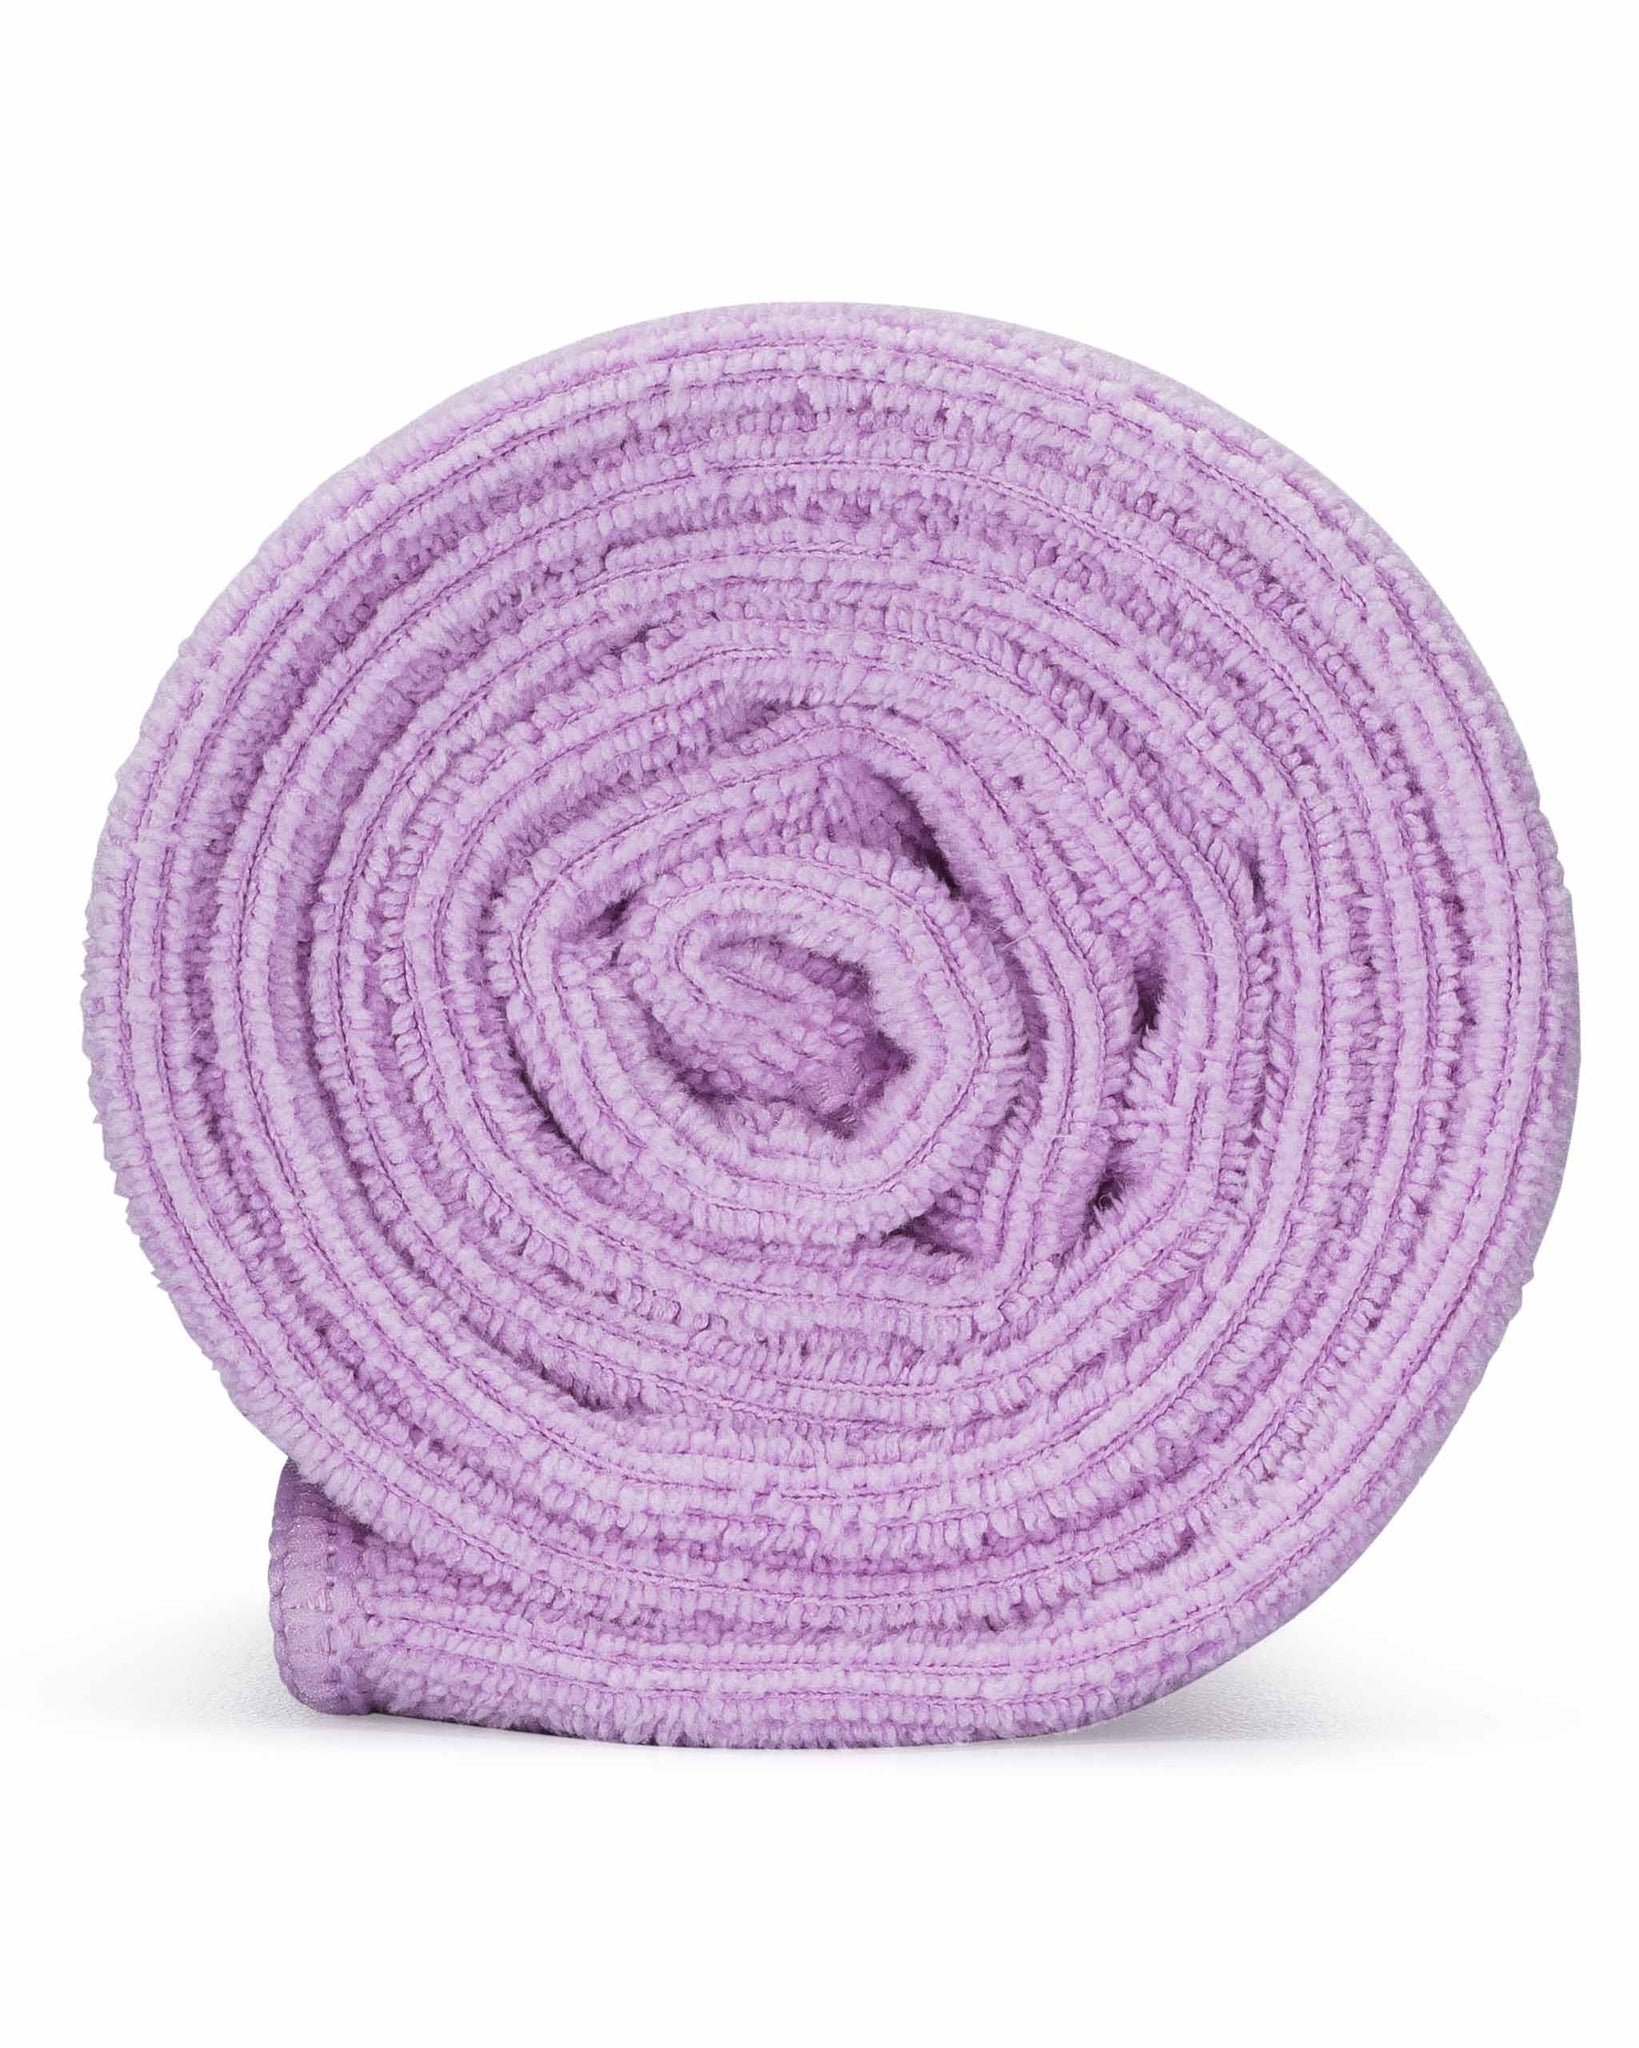 Disposable Hair Towels For Women 27.6 Inch X 11.8 Inches Each